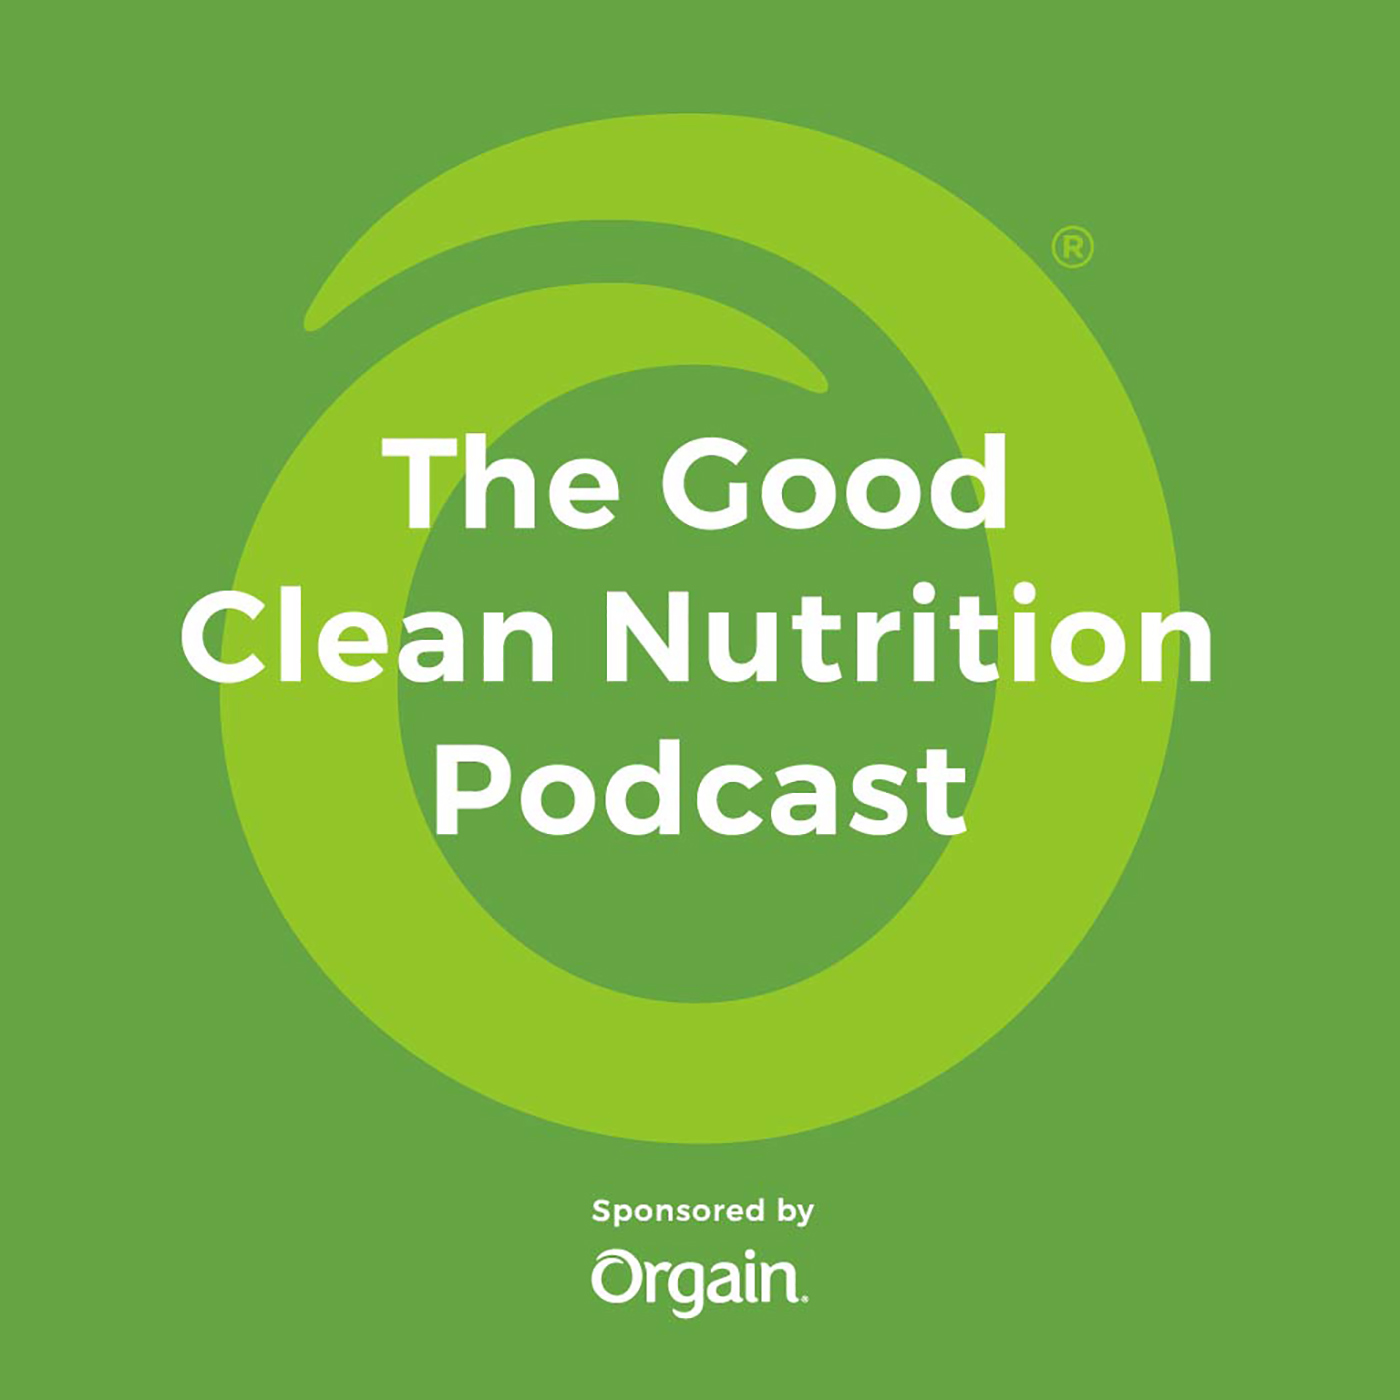 The Good Clean Nutrition Podcast Sponsored by Orgain